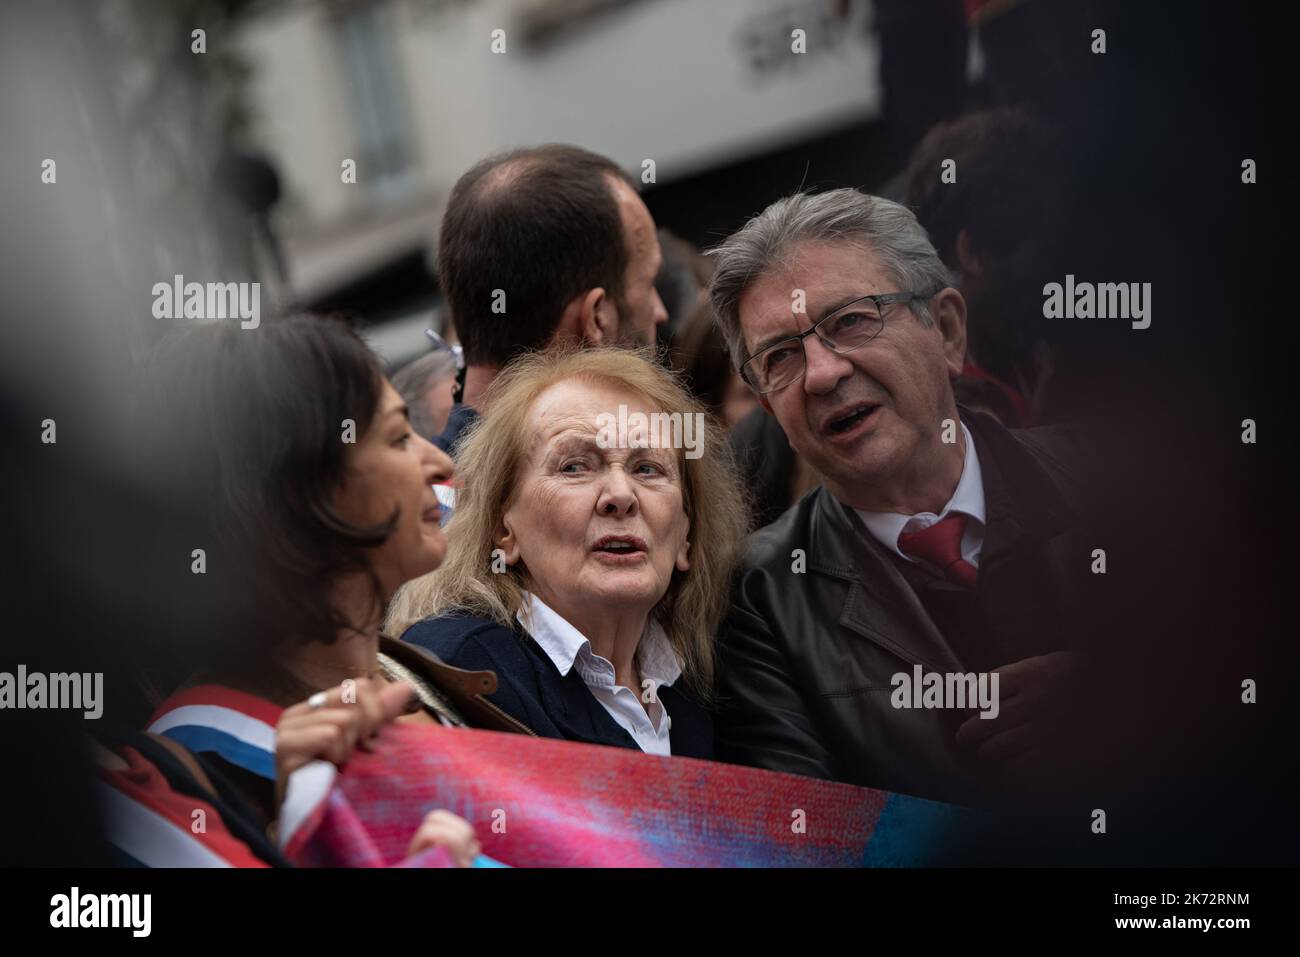 Leader of La France Insoumise LFI and member of the left-wing coalition NUPES Jean-Luc Mélenchon and 2022 Nobel Literature Prize winner Annie Ernaux during a rally against soaring living costs and climate inaction called by French left-wing coalition NUPES (New People's Ecologic and Social Union) in Paris, France on October 16, 2022. Photo by Khanh Renaud/ABACAPRESS.COM Stock Photo